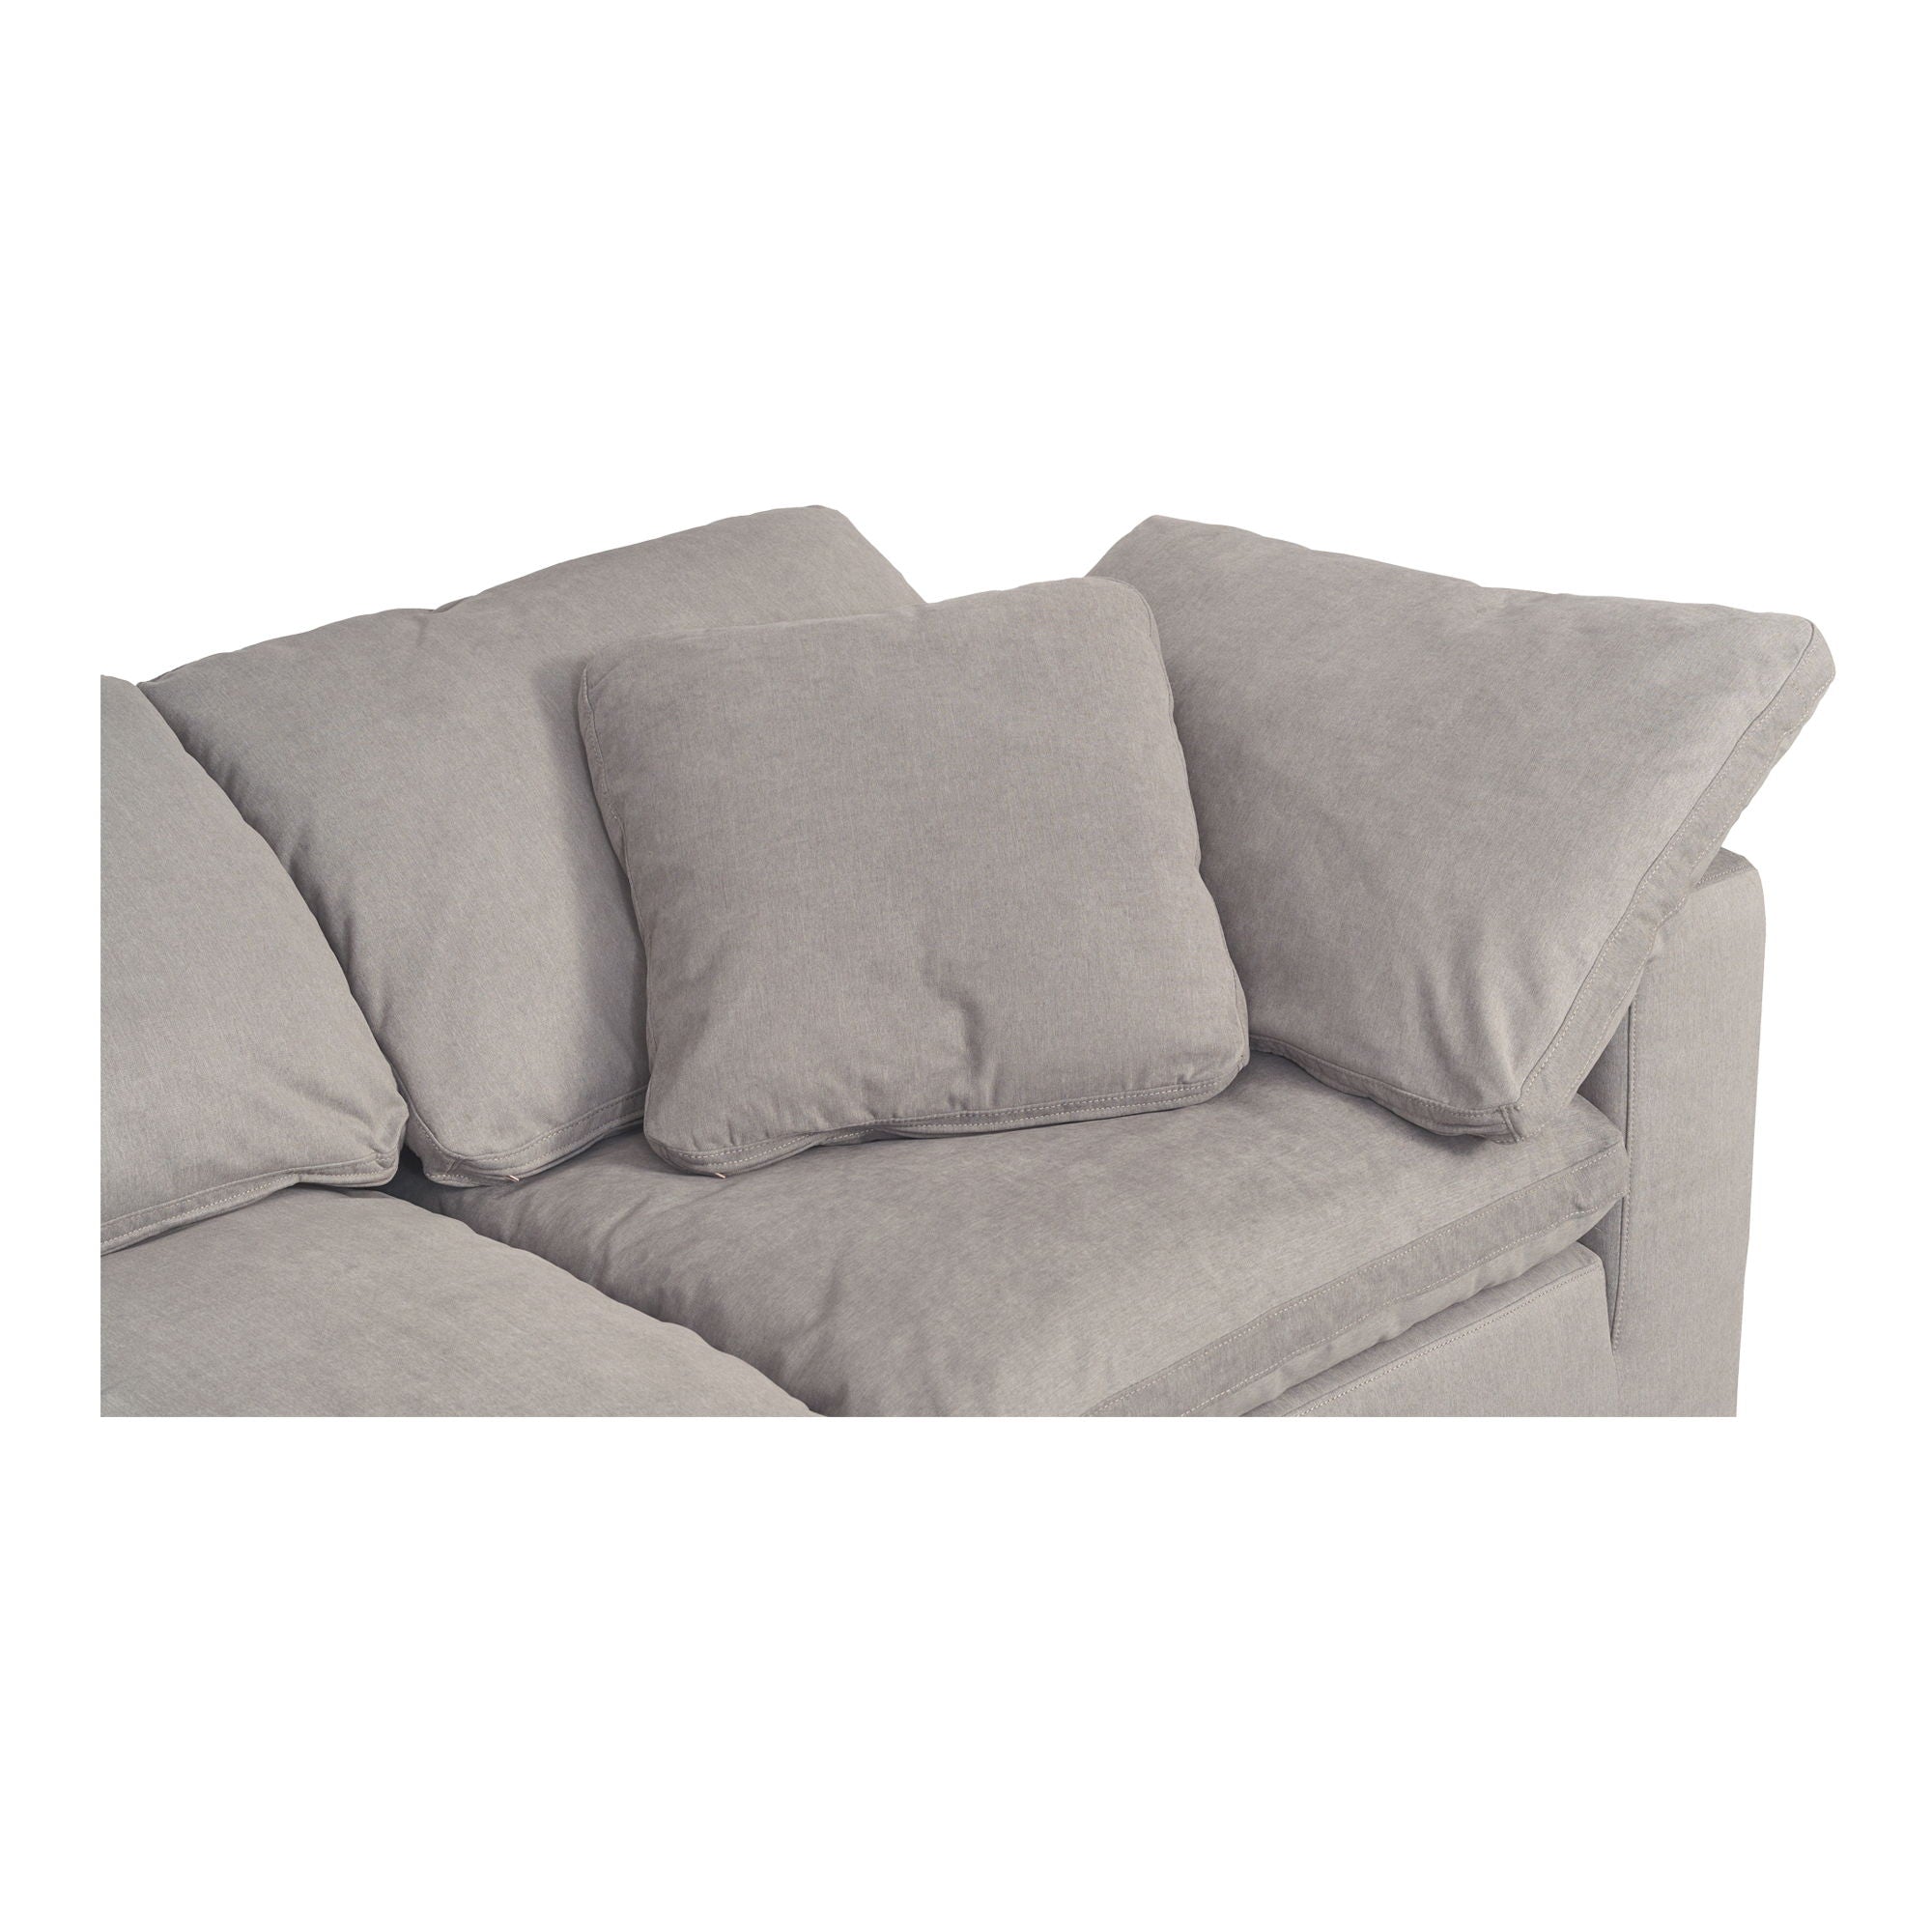 Terra - Modular Sofa Performance Fabric - Light Grey-Stationary Sectionals-American Furniture Outlet